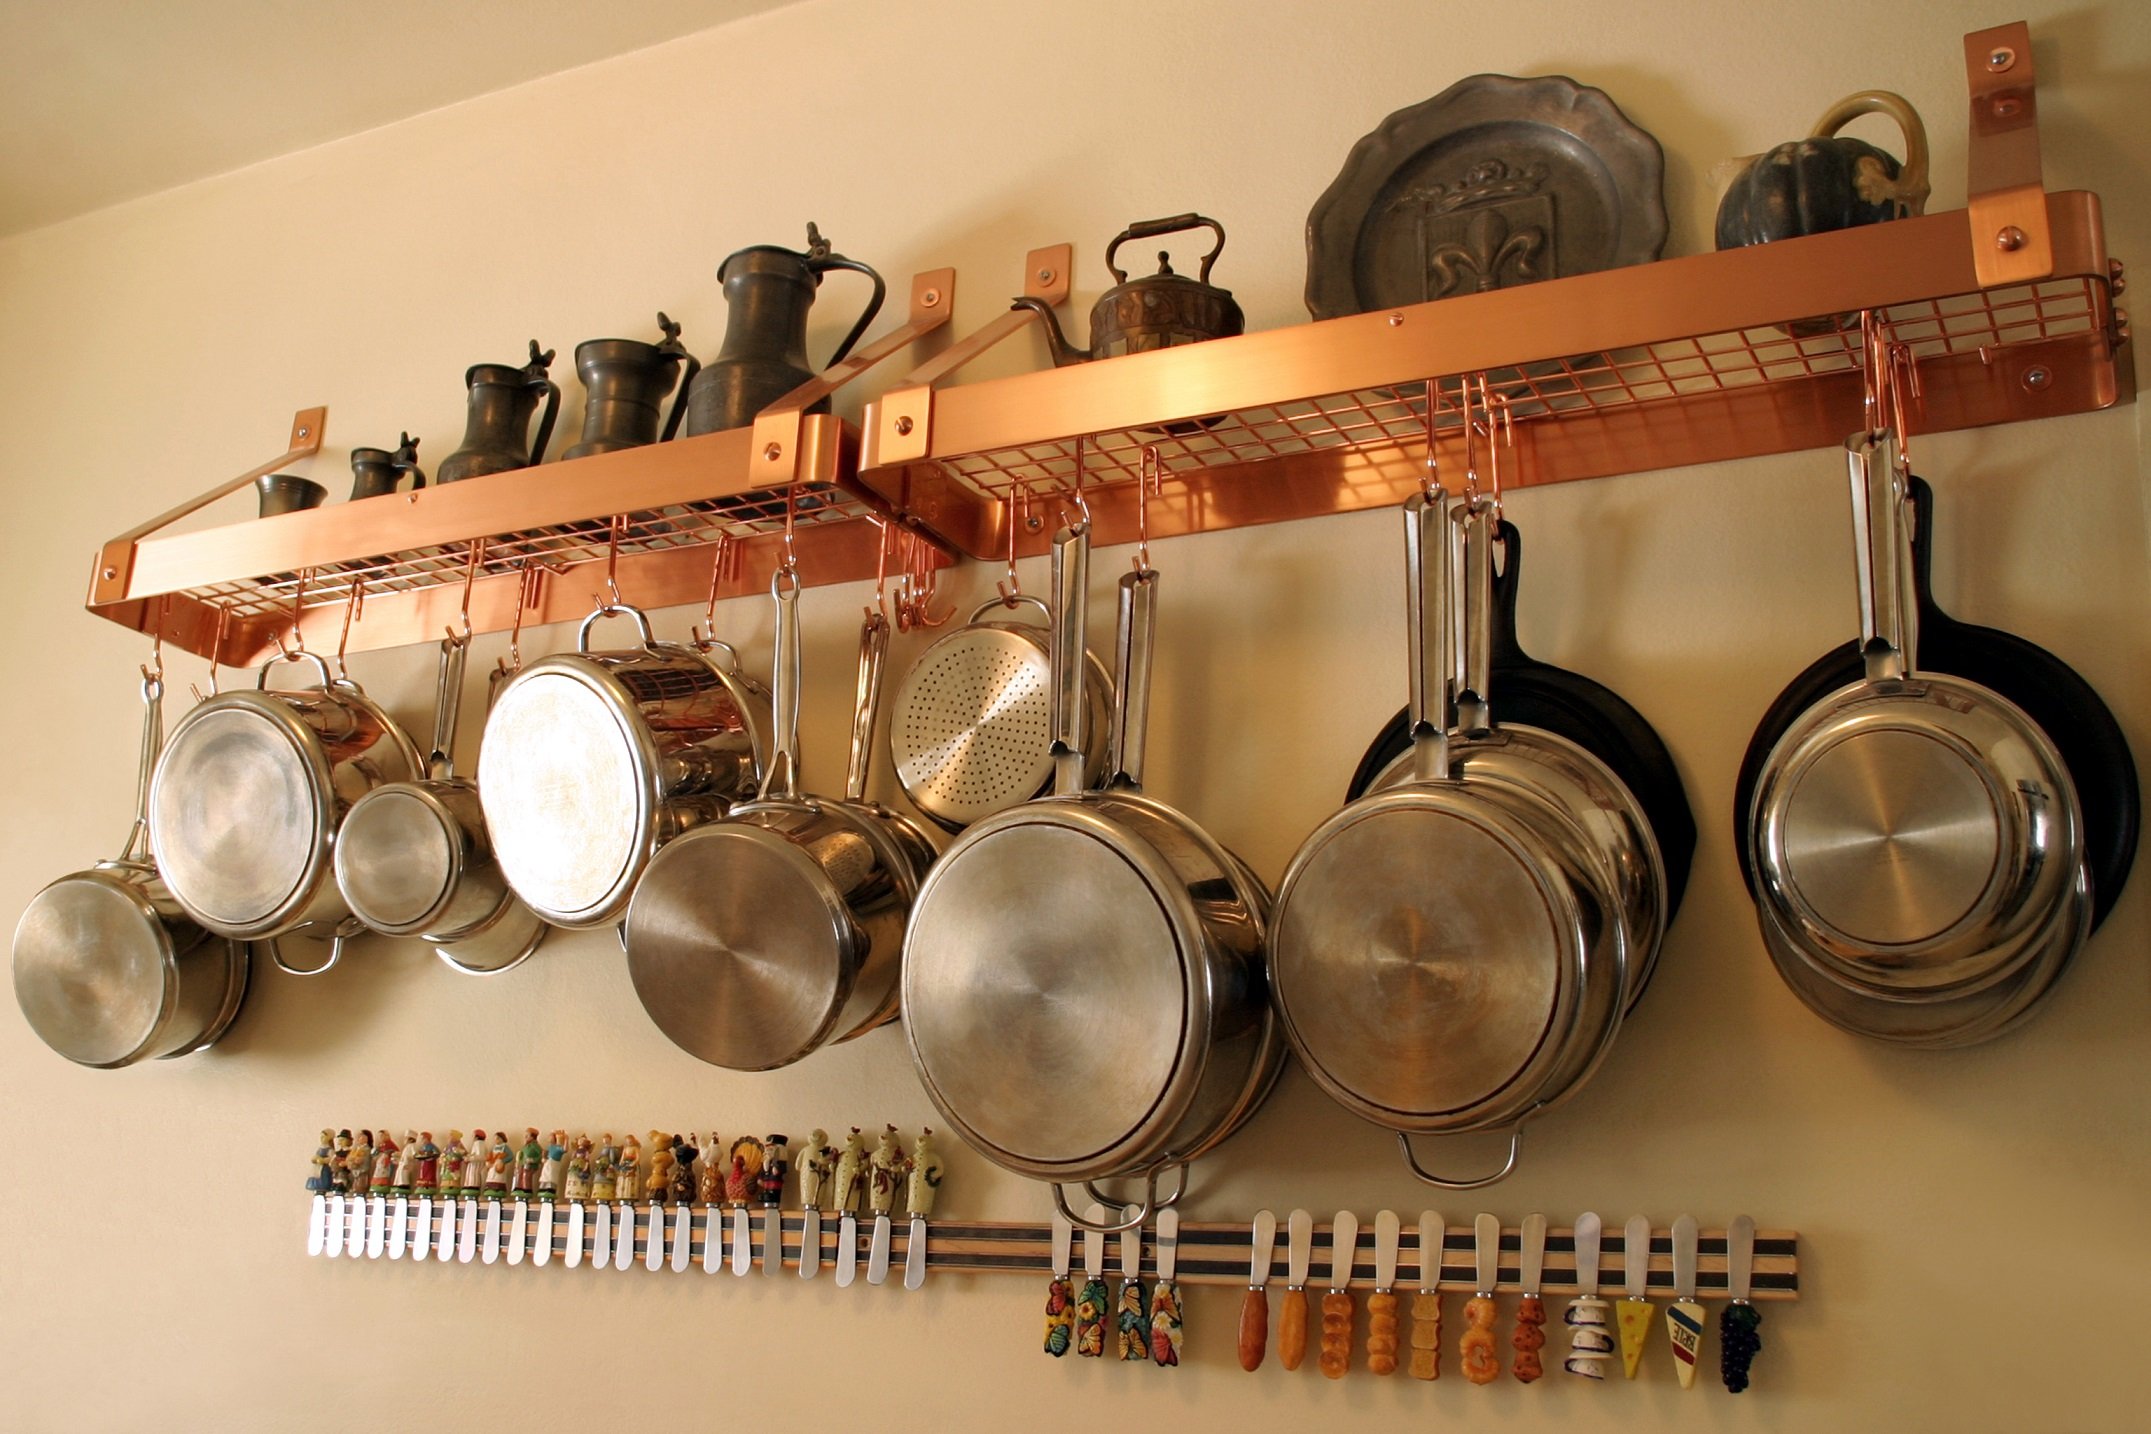 Hanging pots in kitchen